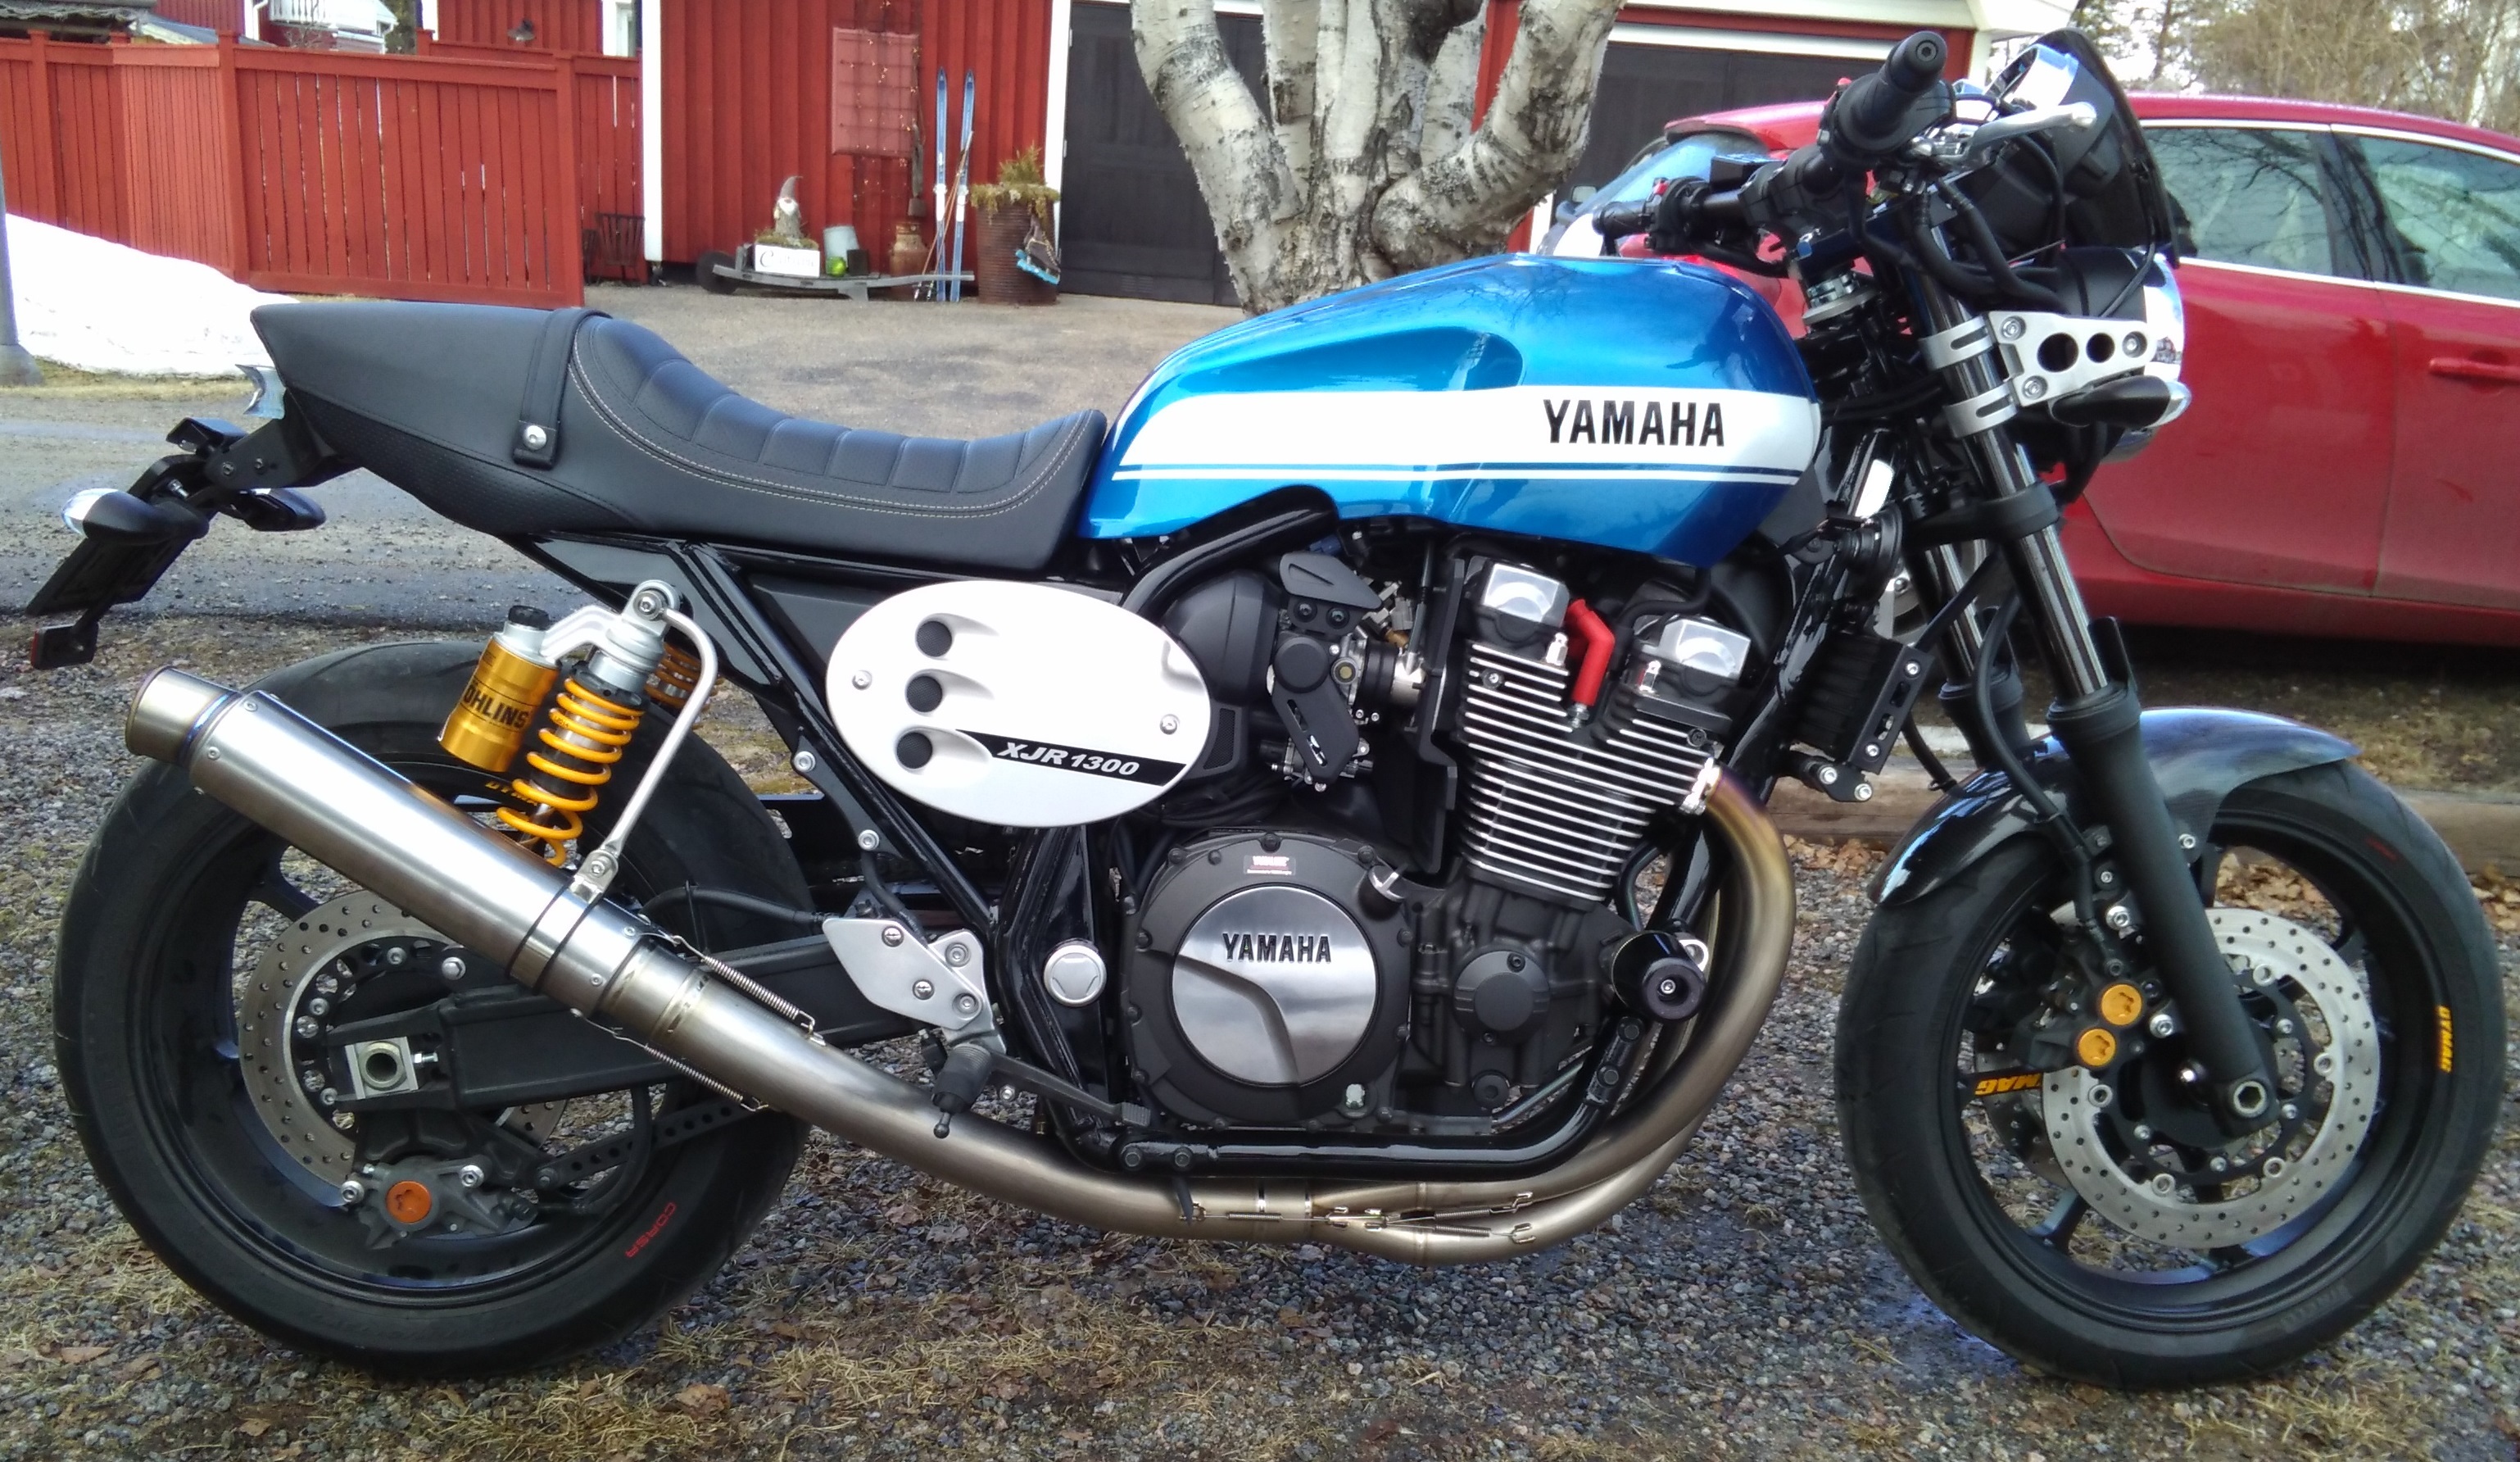 Yamaha XJR1300 (in Sweden) with BSD-mapped Power Commander PC V – the owner emails his thoughts…